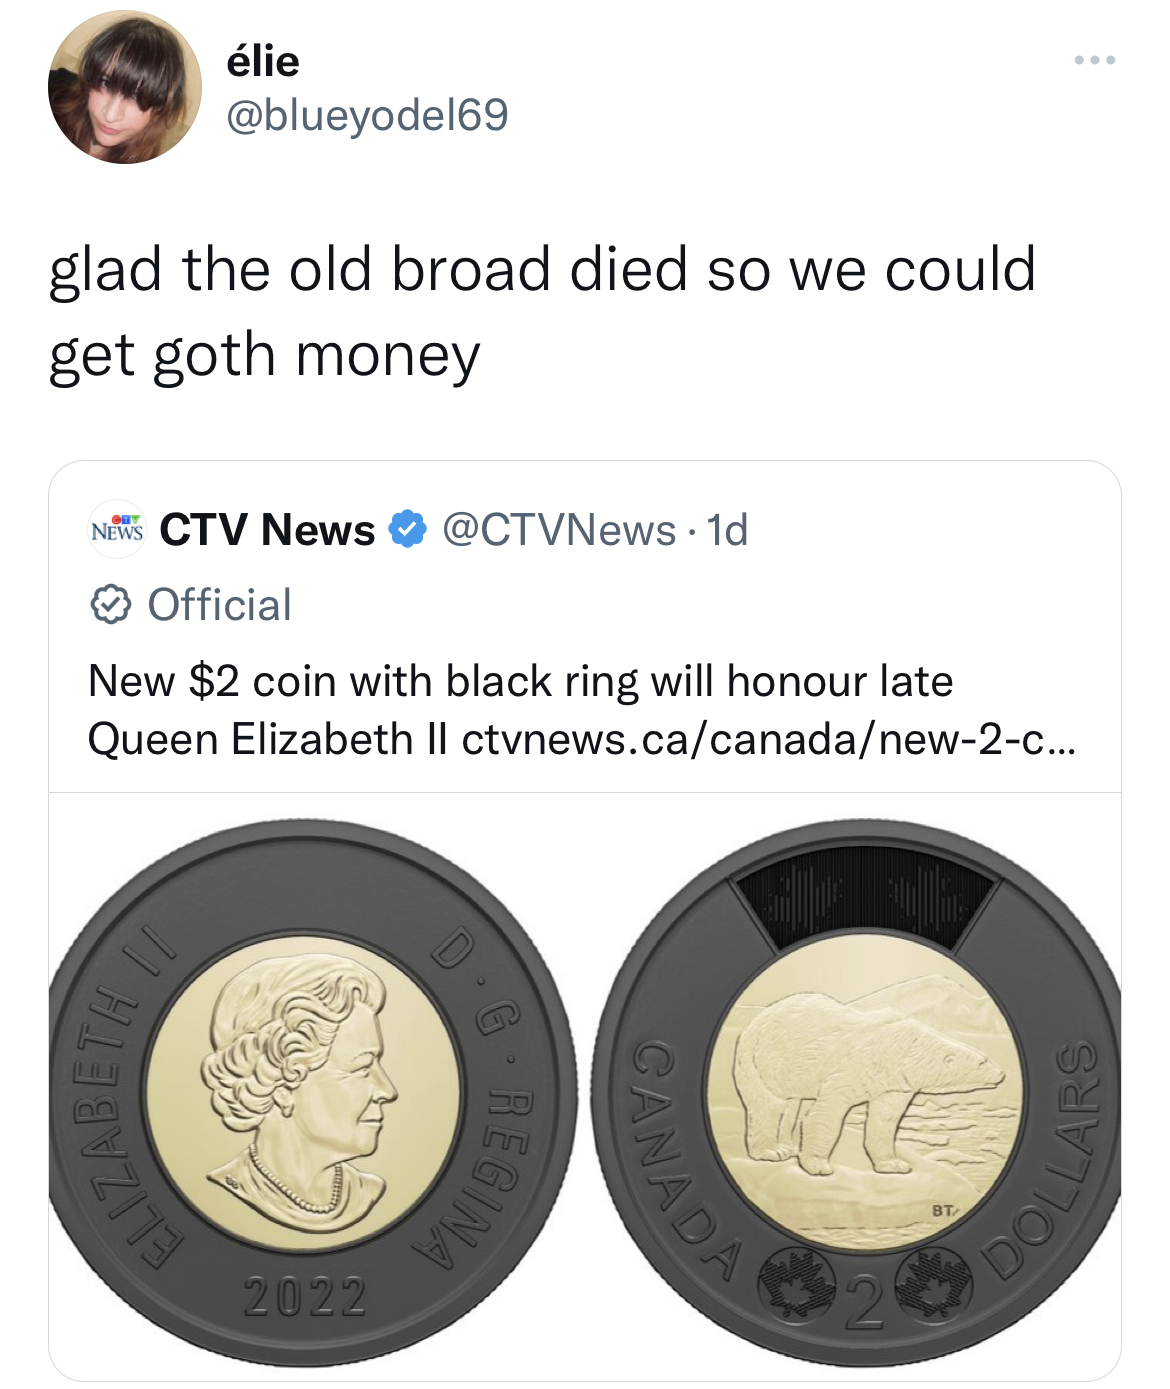 Tweets dunking on celebs - money - lie glad the old broad died so we could get goth money News Ctv News . 1d Official New $2 coin with black ring will honour late Queen Elizabeth Ii ctvnews.cacanadanew2c... Oo 2022 Regina Canada A 2